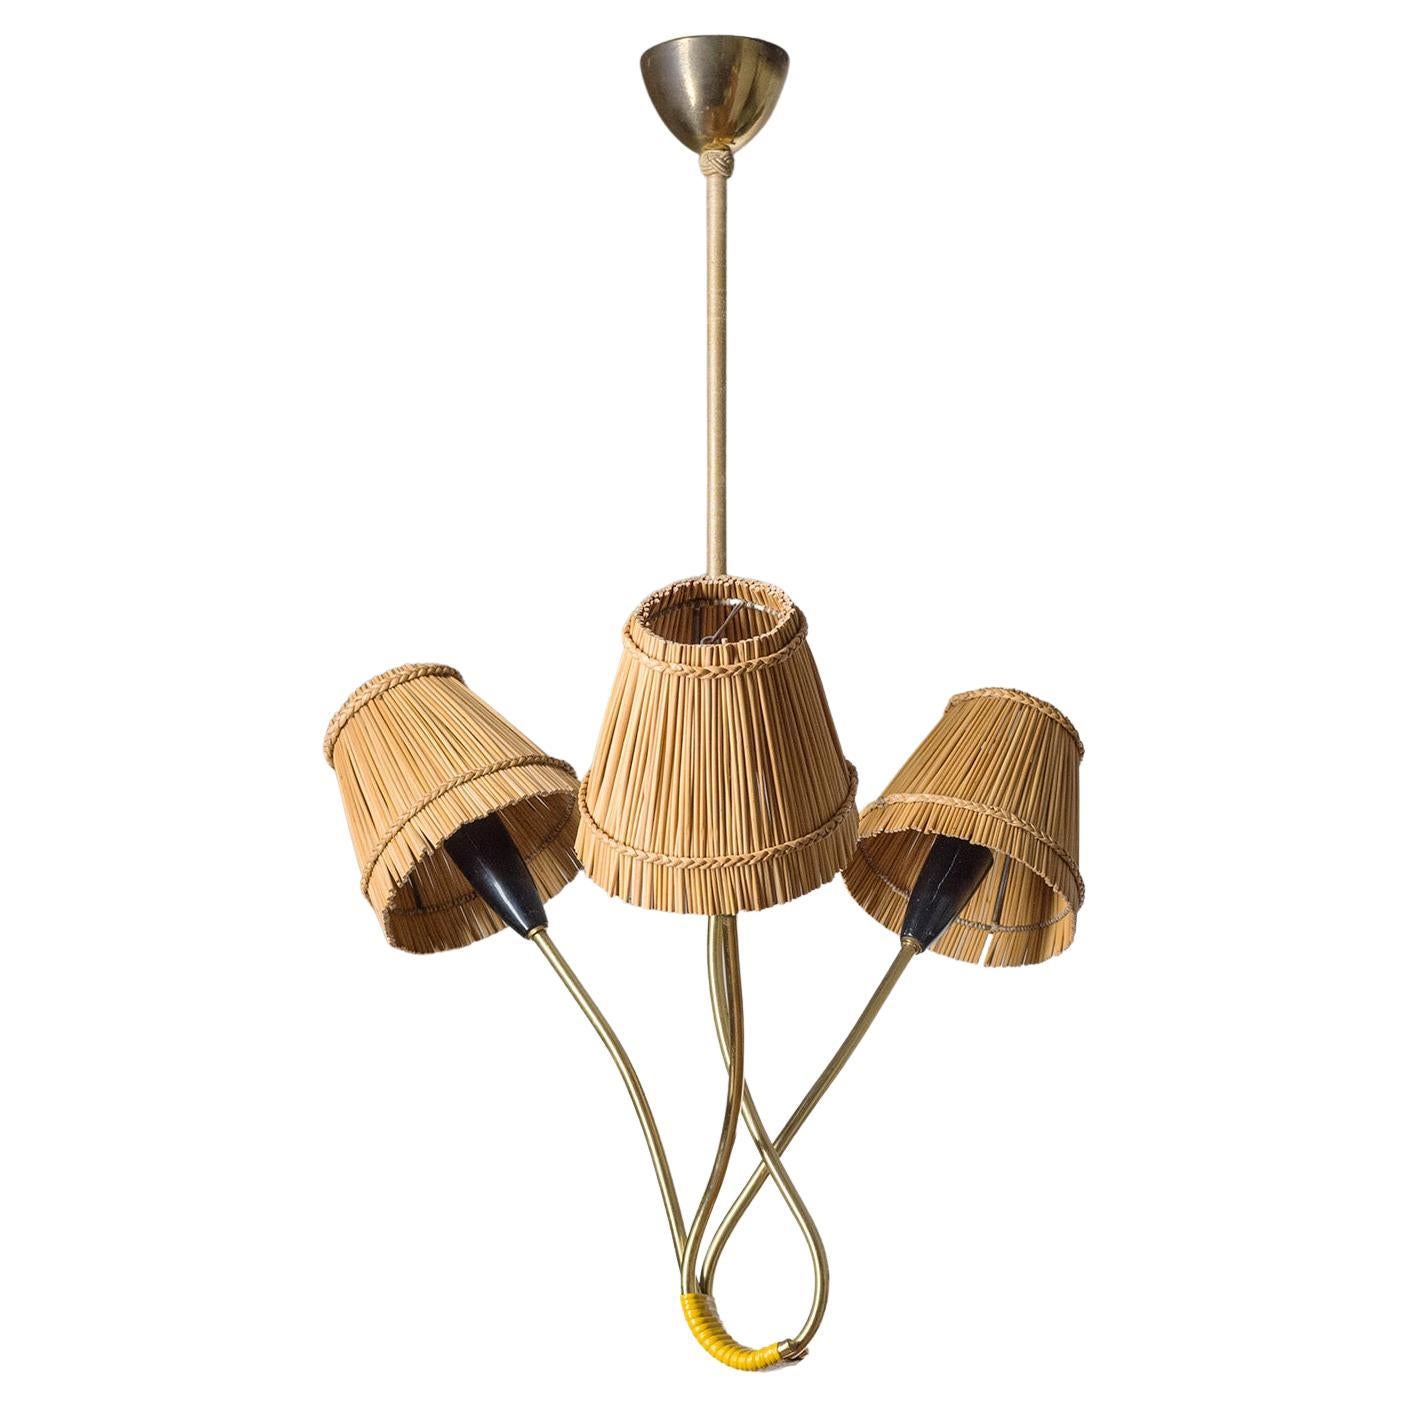 Rare Brass Chandelier with Rattan Shades, 1950s